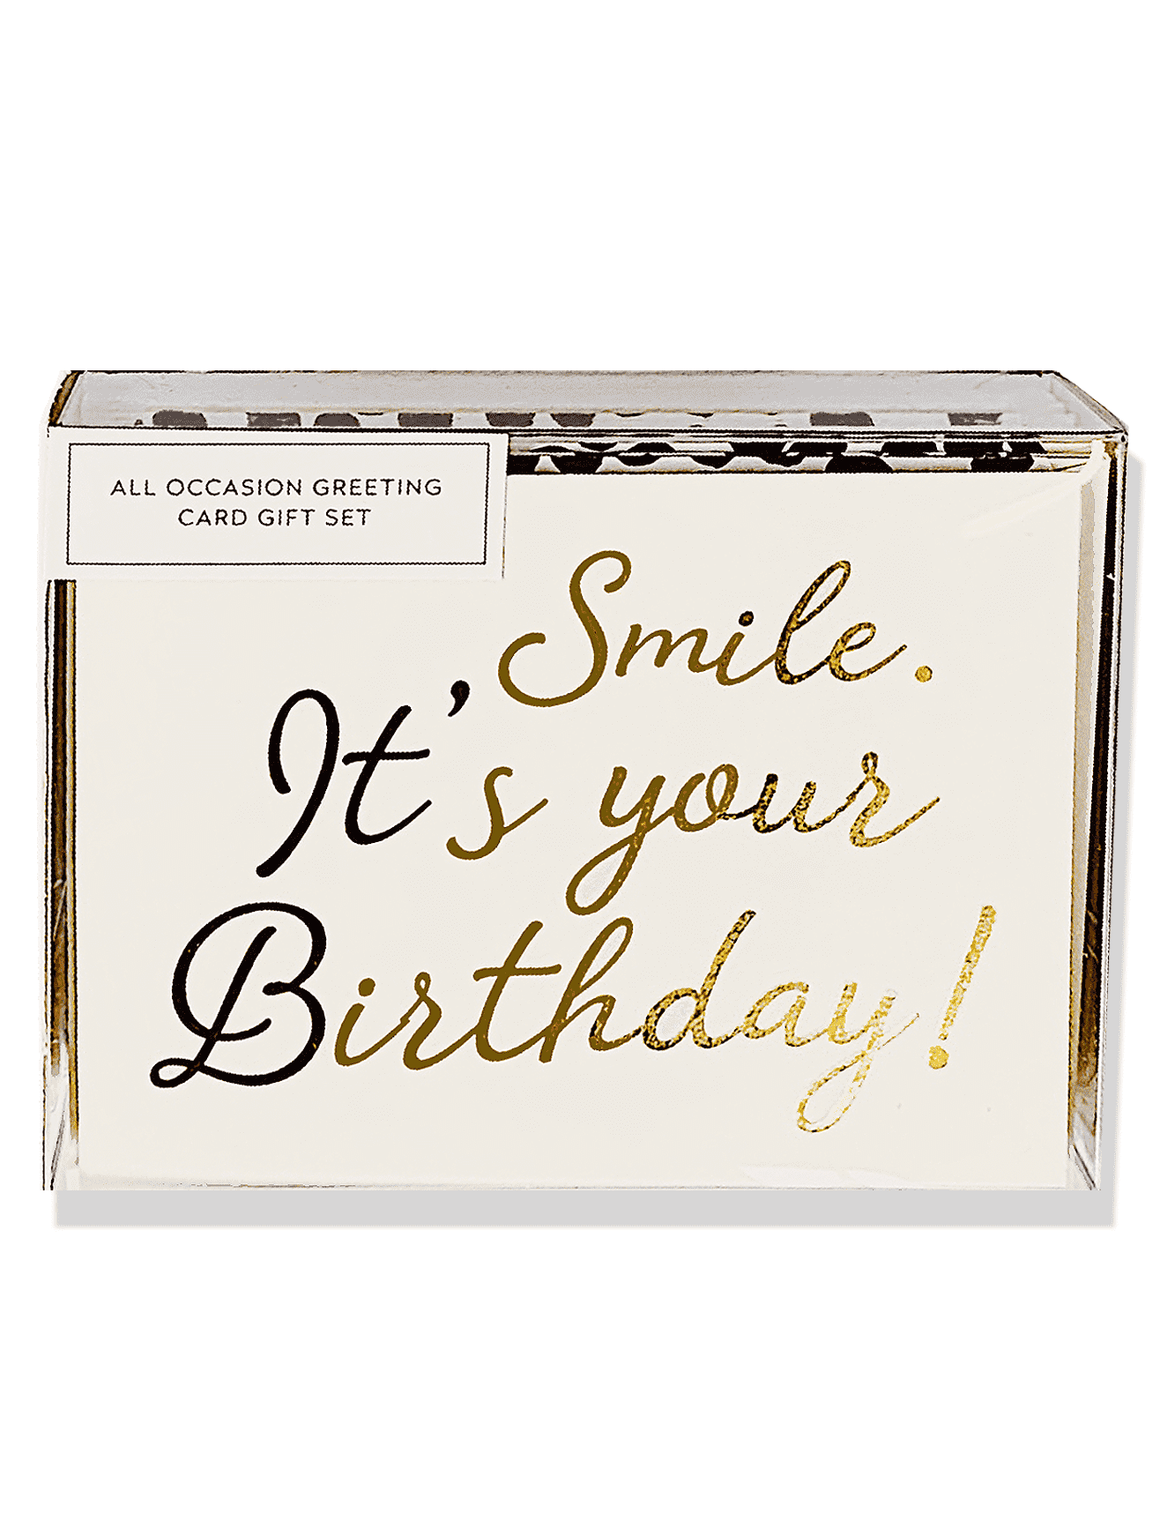 All Occasion Greeting Card Gift Set of 15 - Bensgarden.com